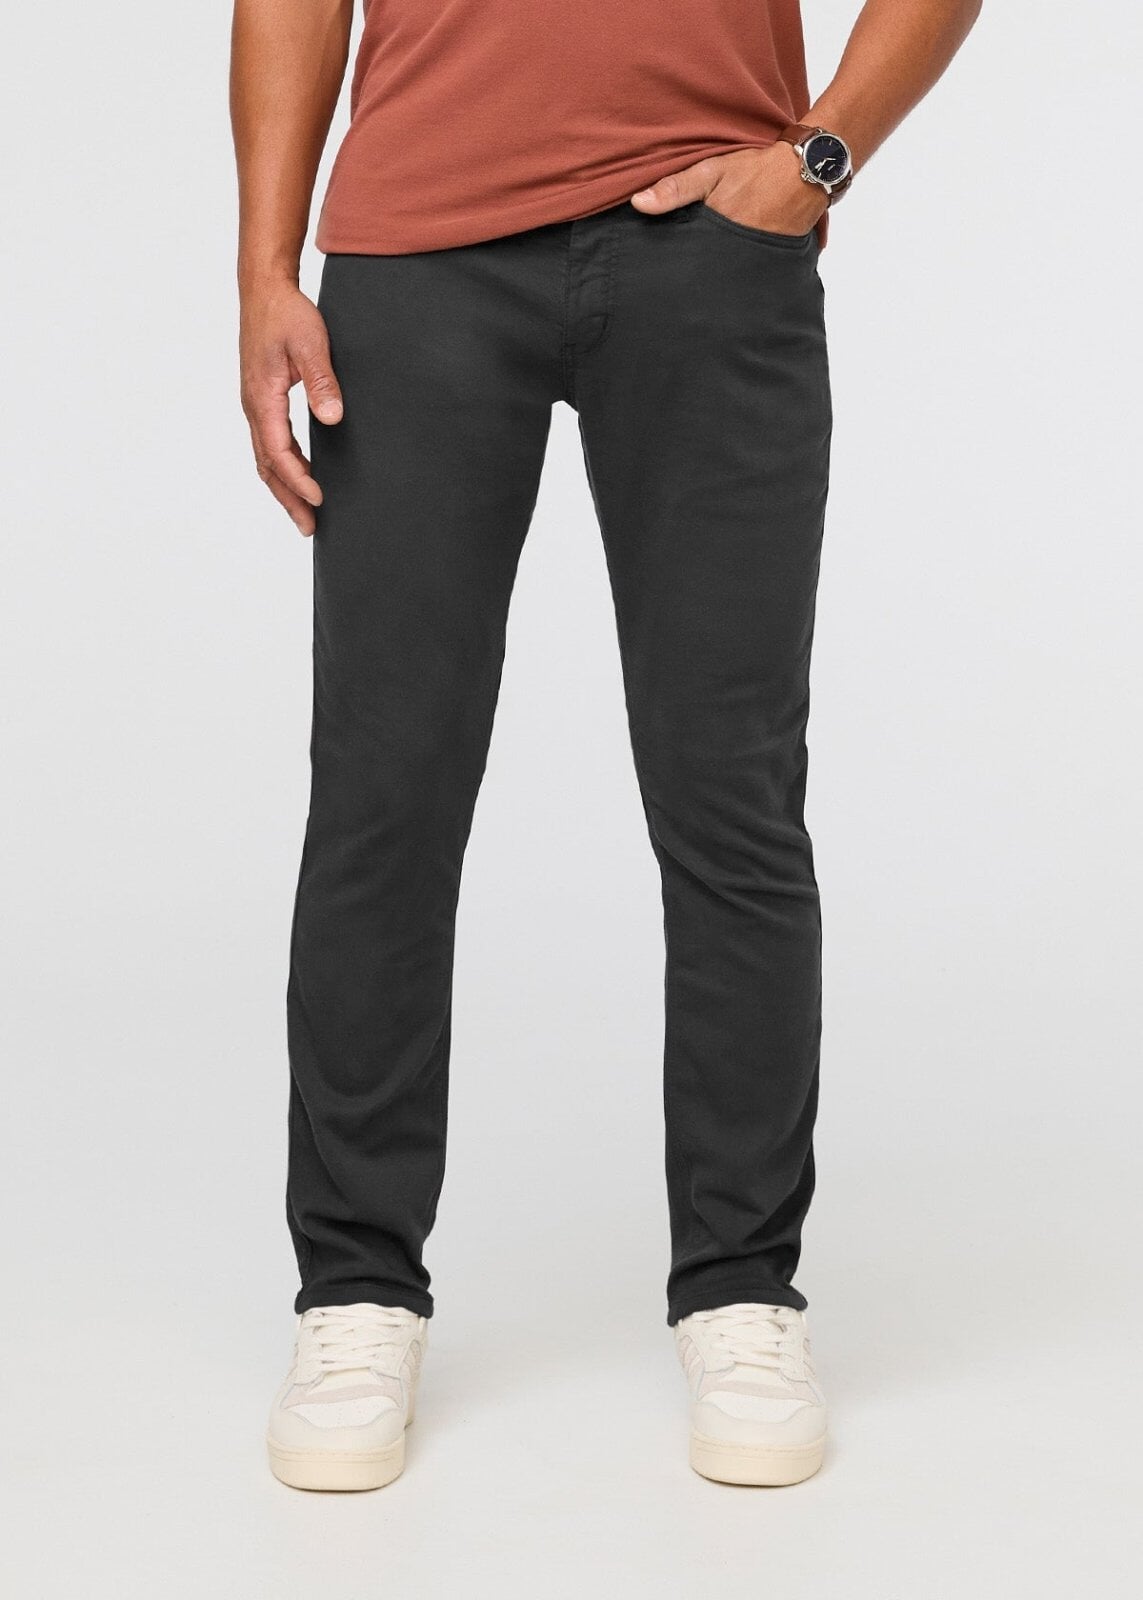 DUER N2X Relaxed Fit Pants - Men's - 32 Inseam